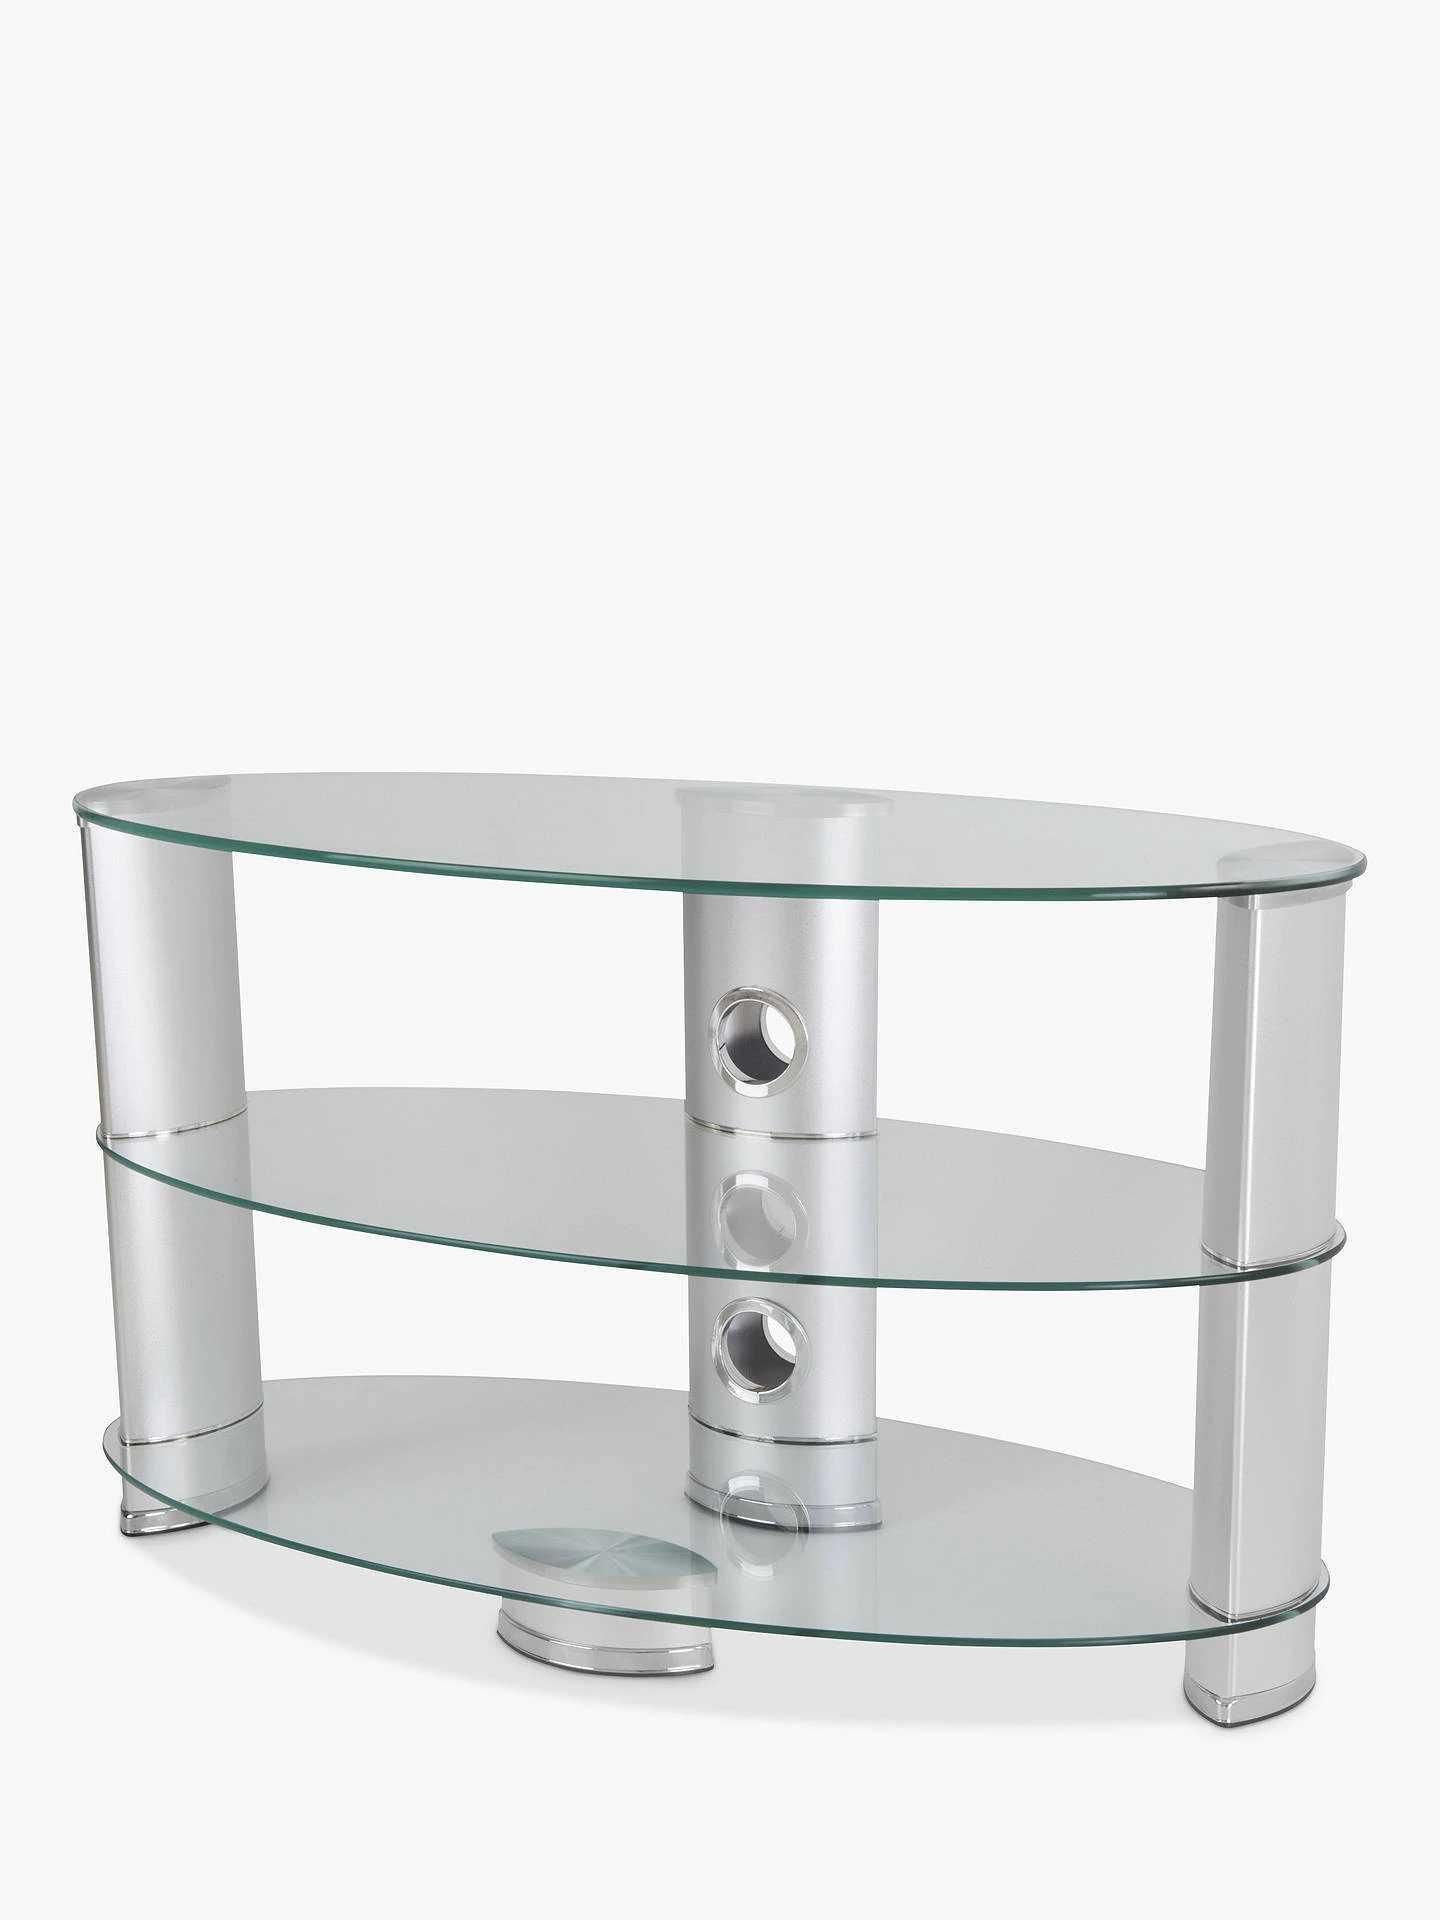 RRP £170 Jl Oval Television Stands For 60 Inch Televisions Clear Glass Chrome Finish (758544) - Image 2 of 2